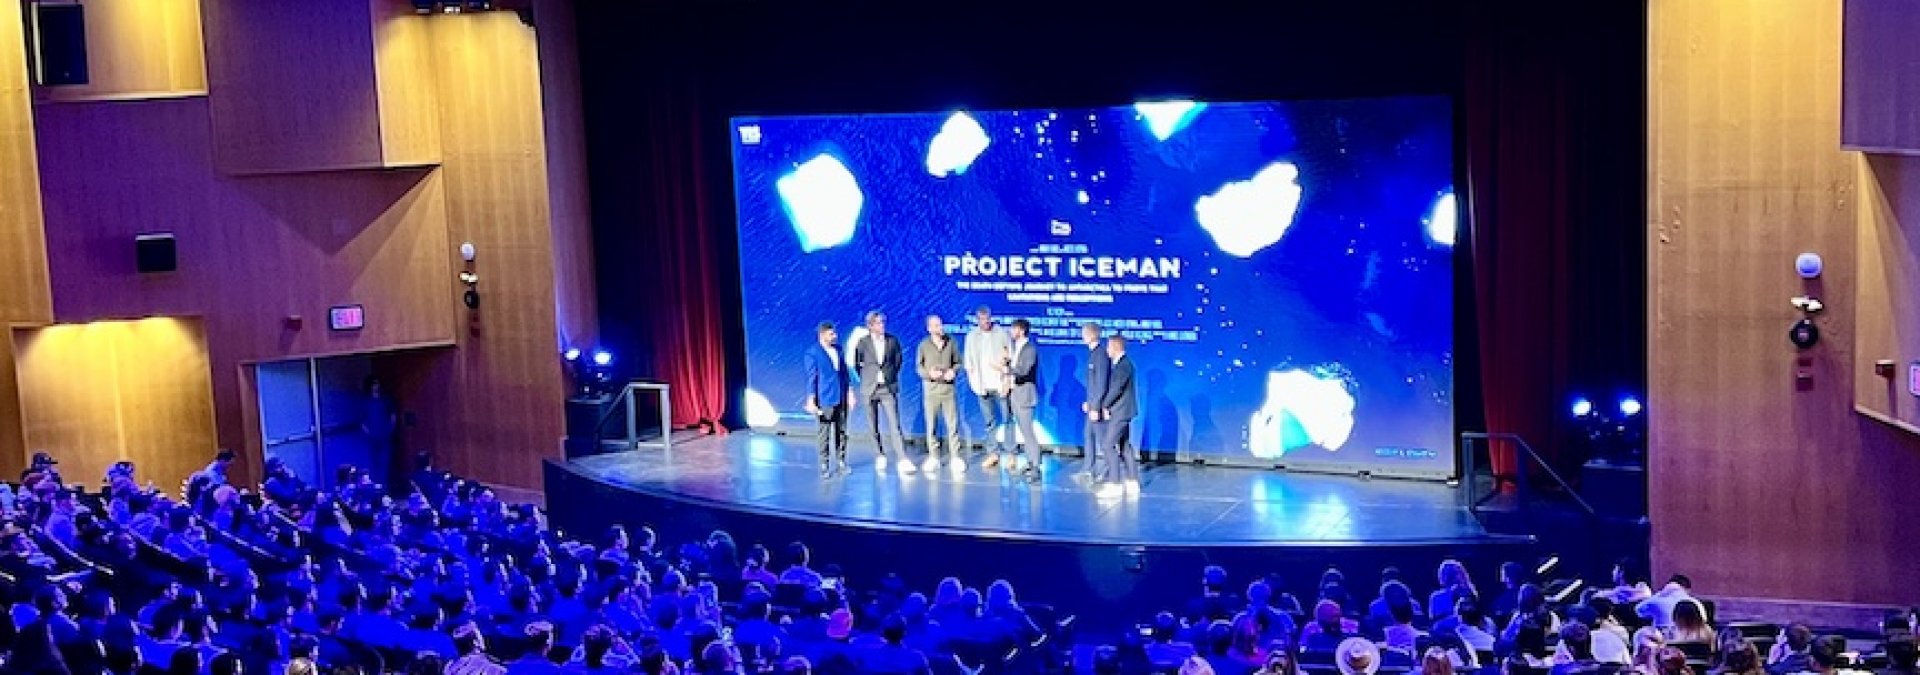 Project Iceman movie premier. Tribeca Performing Arts Center